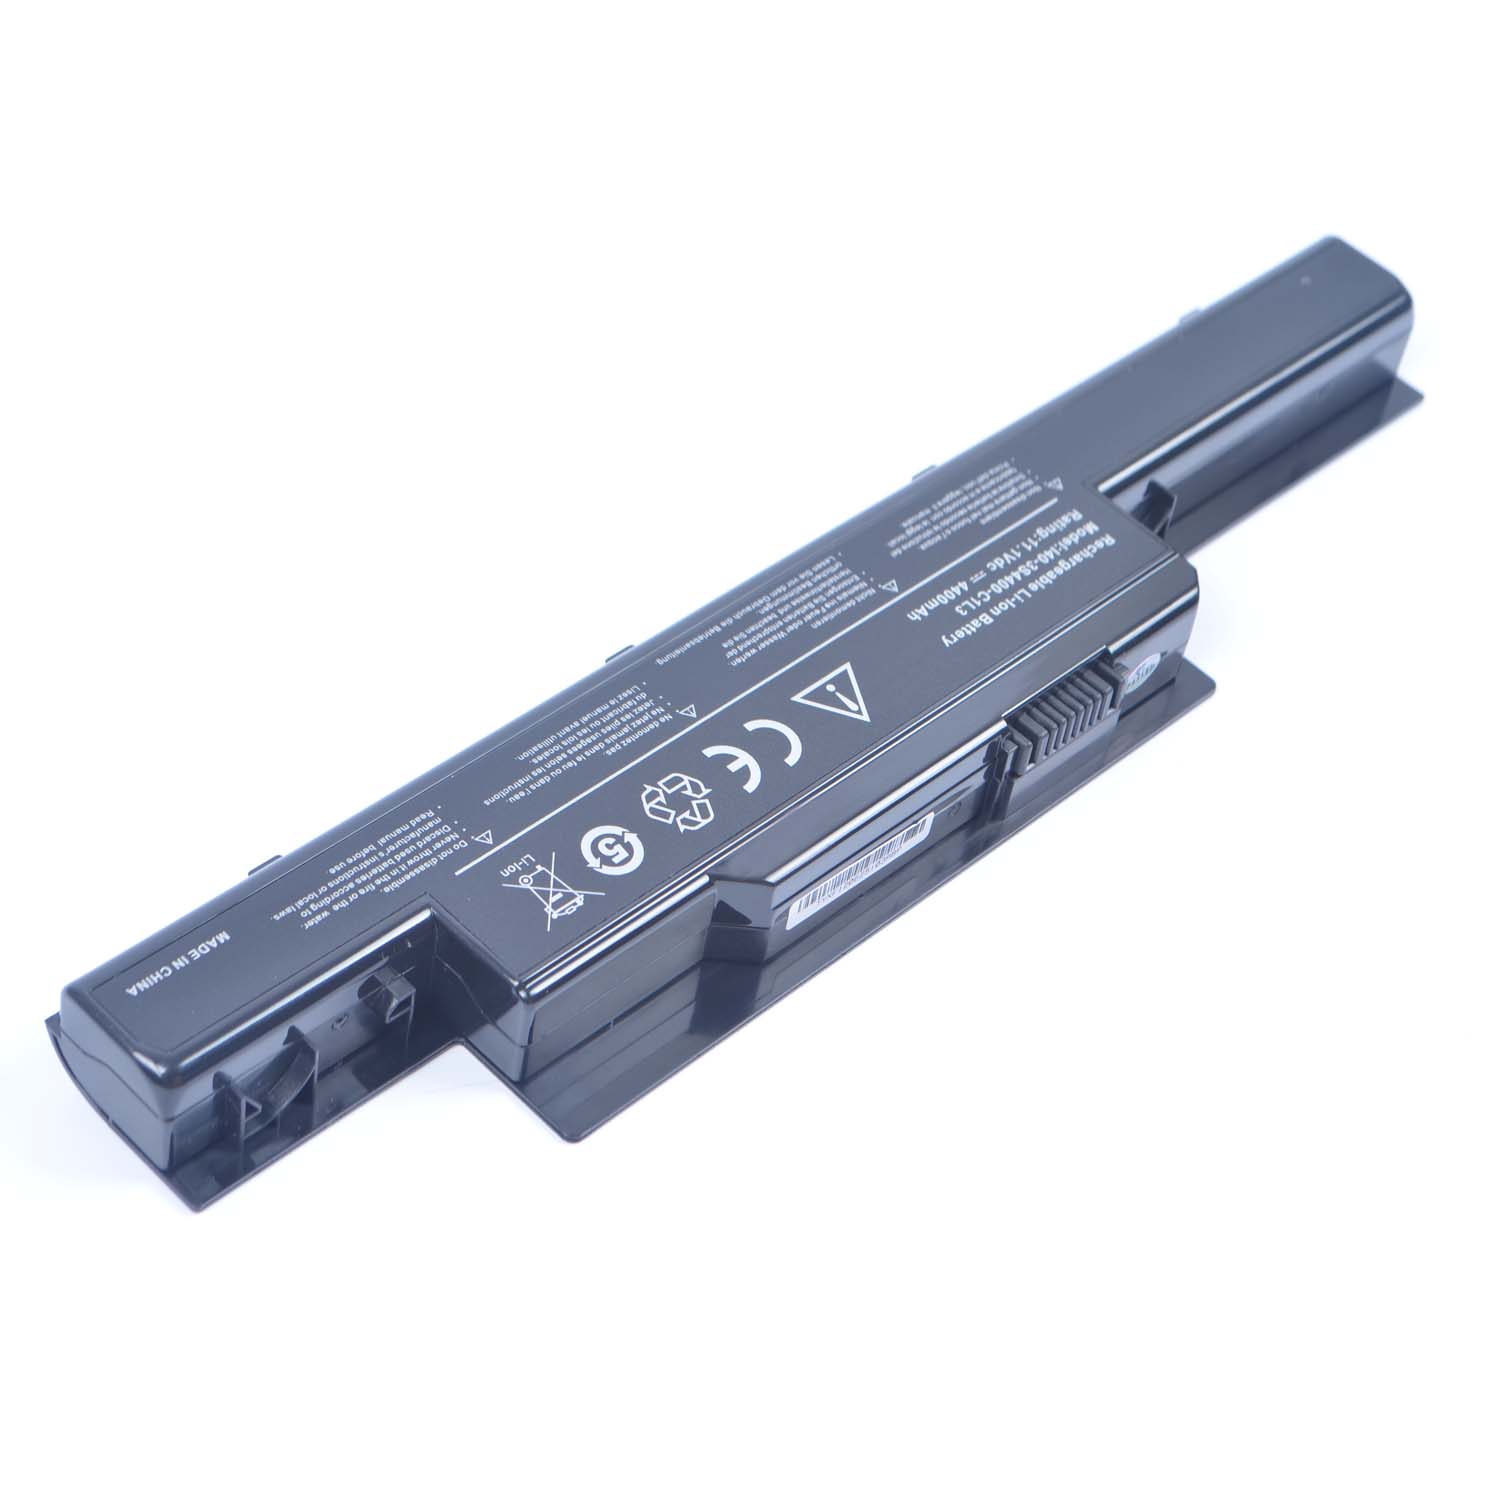 Replacement Battery for ADVENT I40-4S2200-C1L3 battery